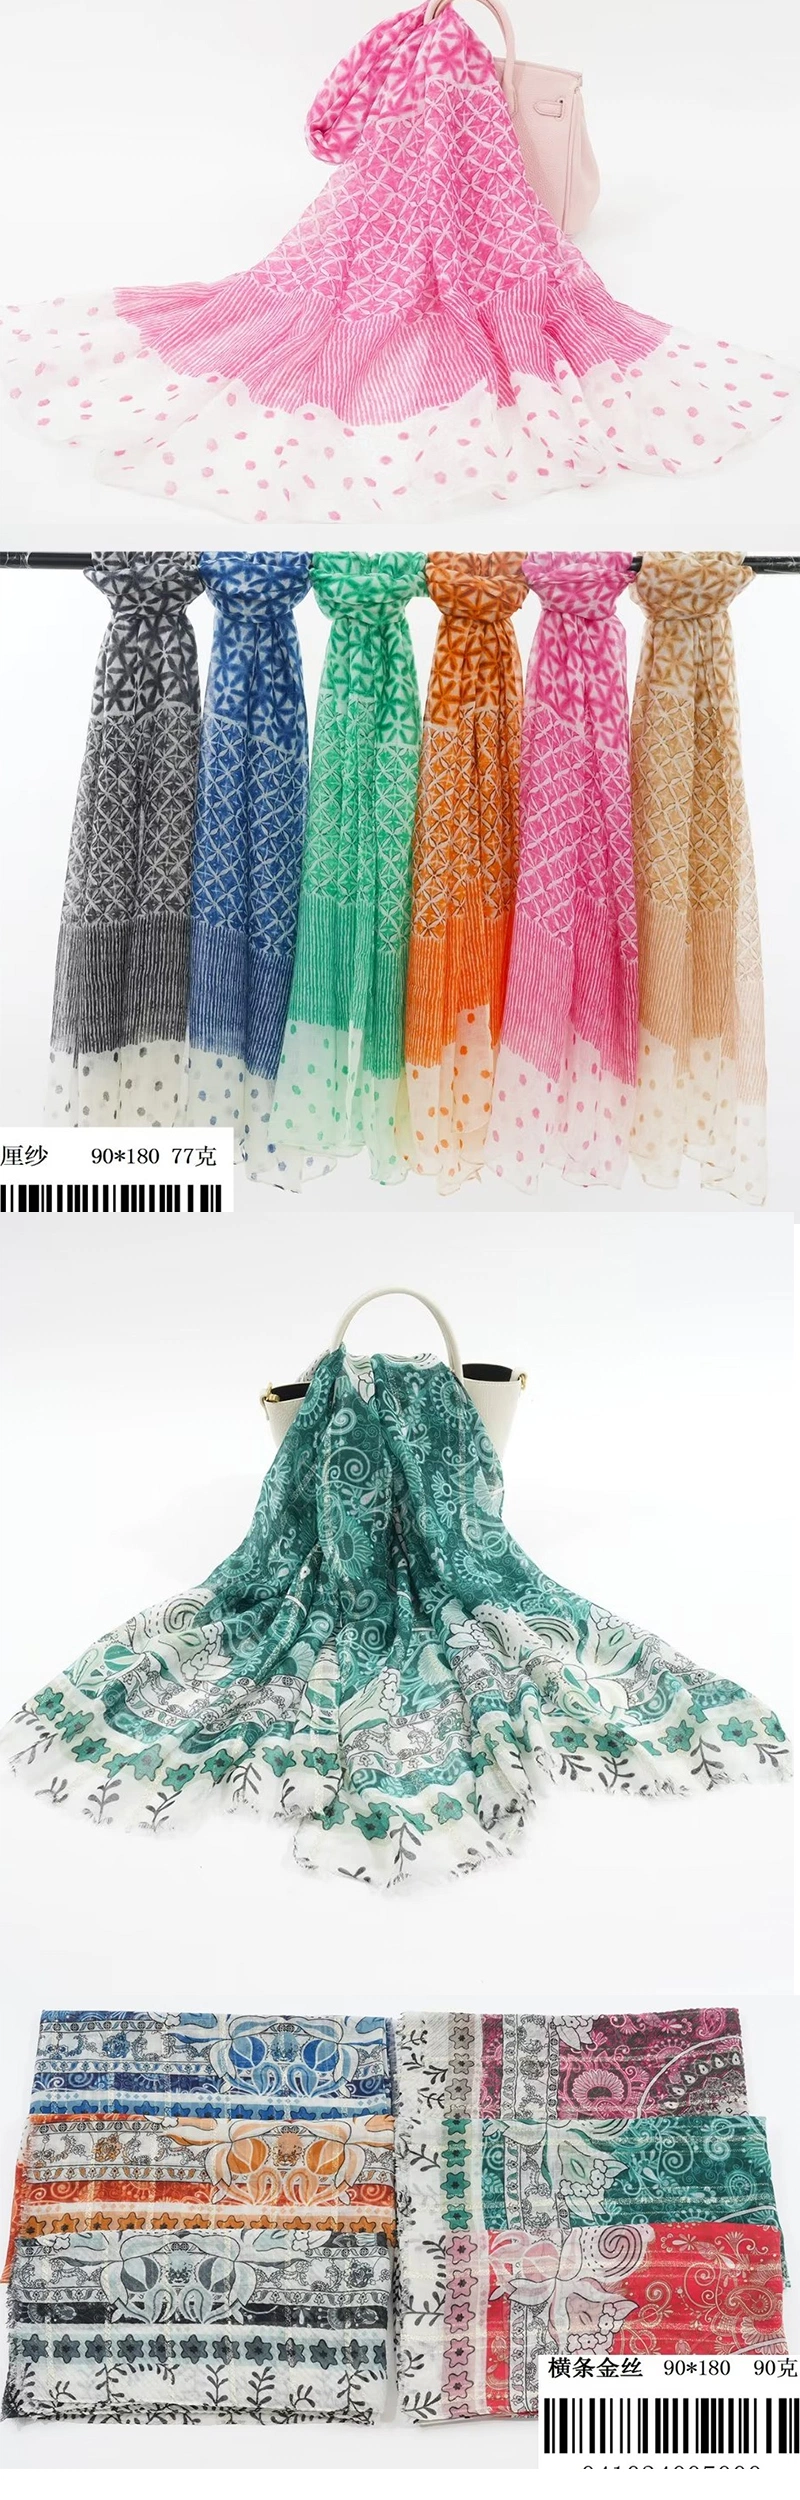 Newest Fashion Summer Bright Breathable Cotton Voile Scarfs